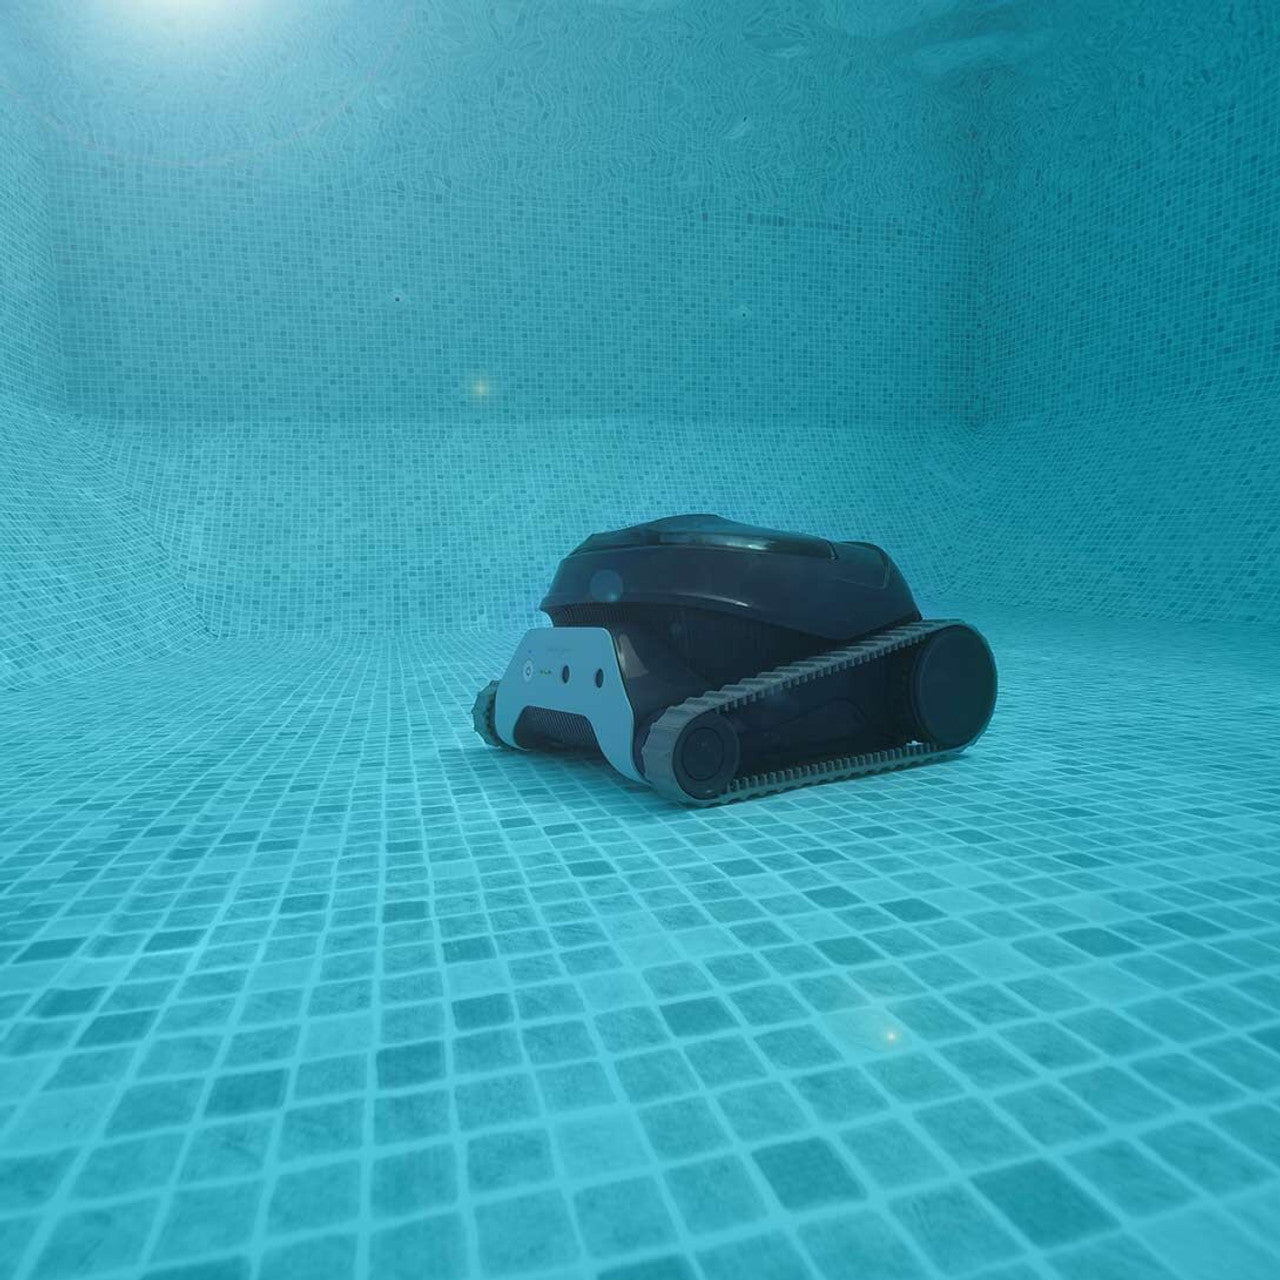 Maytronics Dolphin Liberty 300 Robotic Pool Cleaner